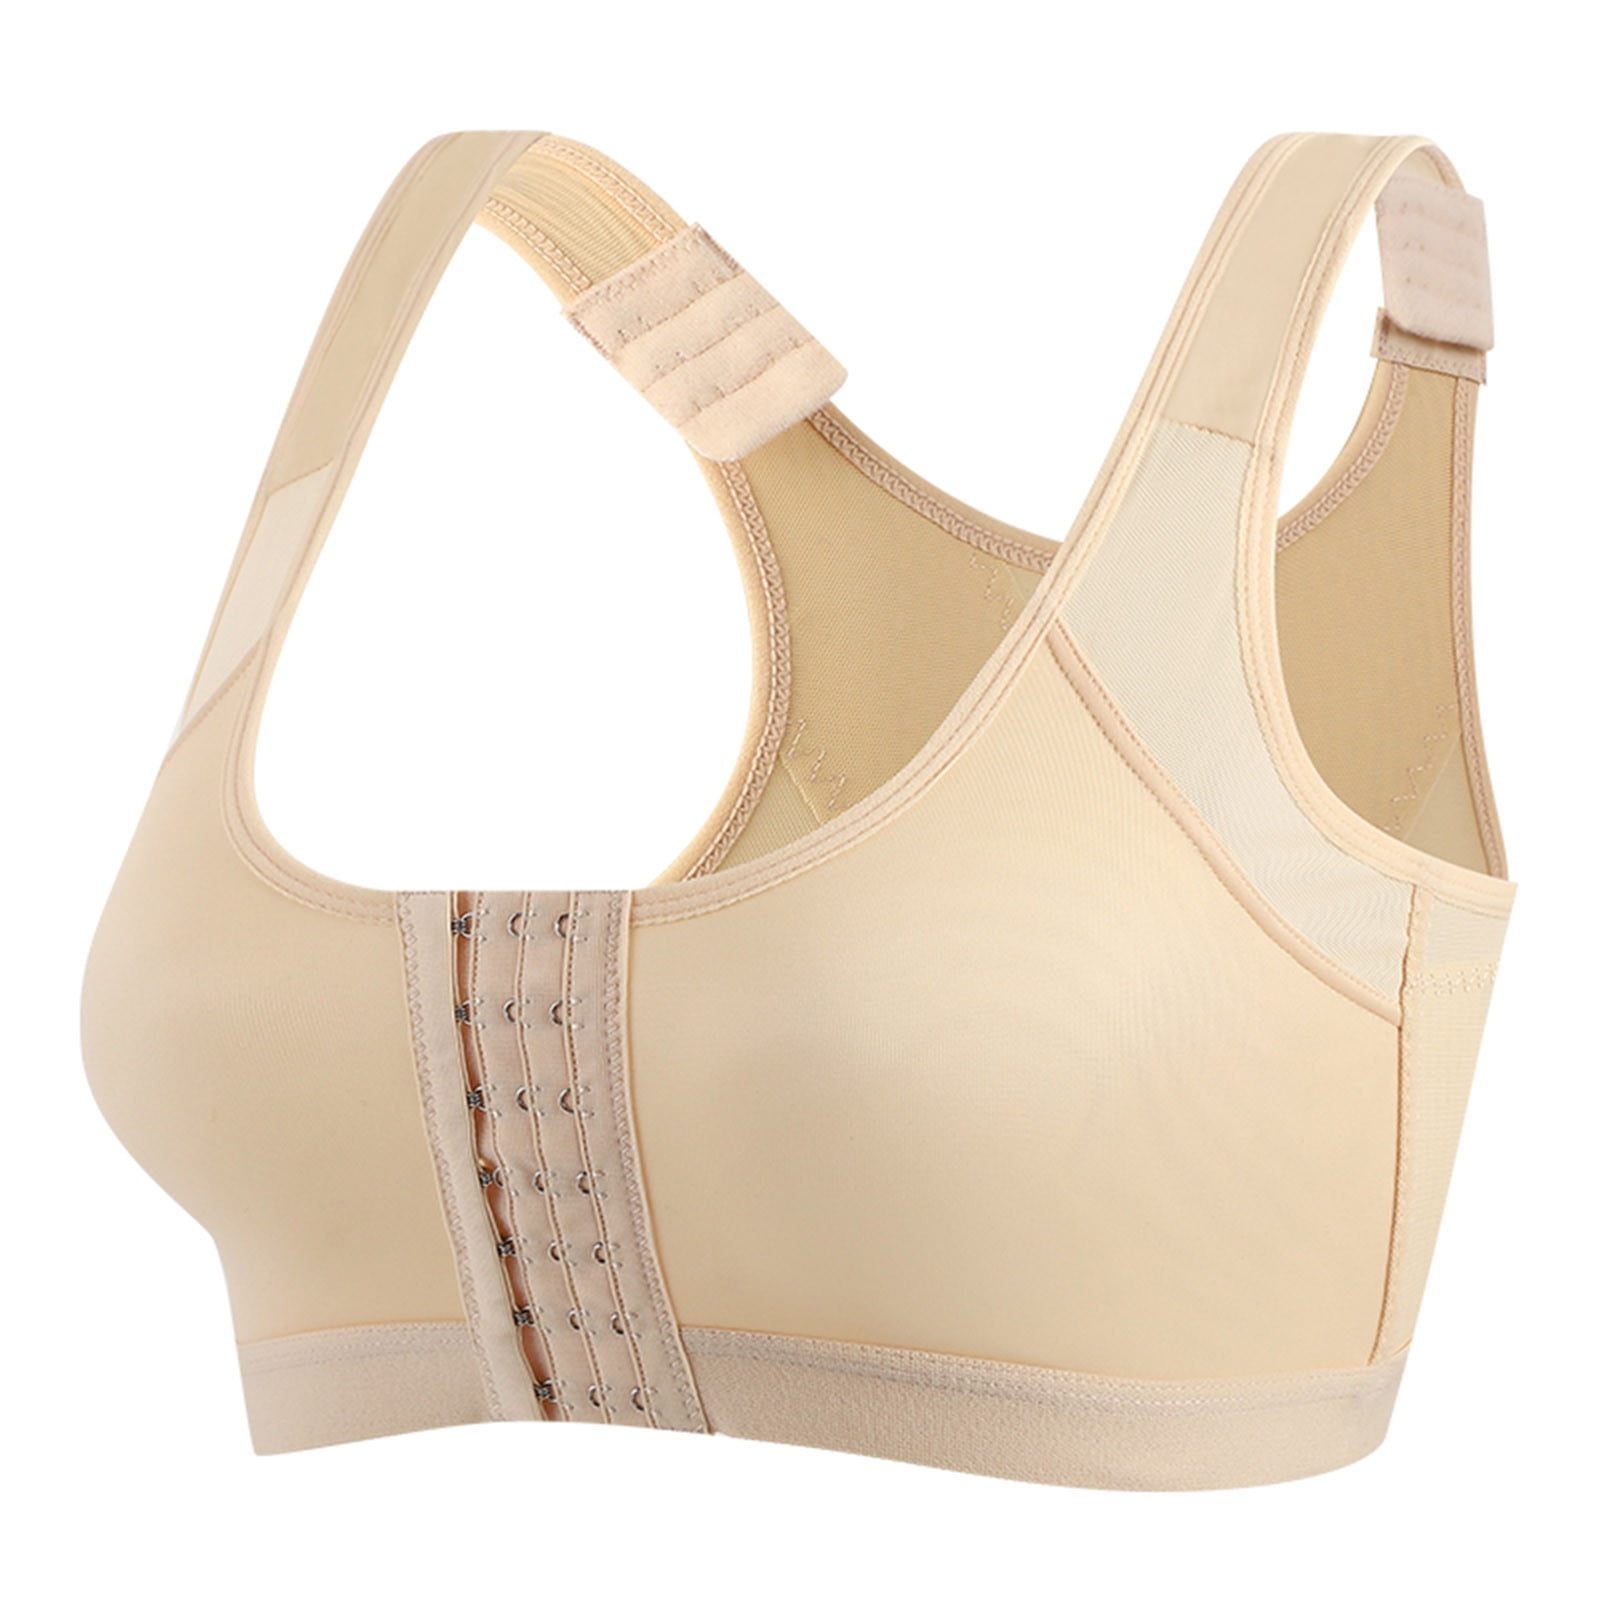 APEXFWDT Women's Front Closure Wireless Full-Coverage Bra Plus Size  Adjustable Strap Cotton Bra Lightly Lined Wirefree Breathable Bra Bralette  